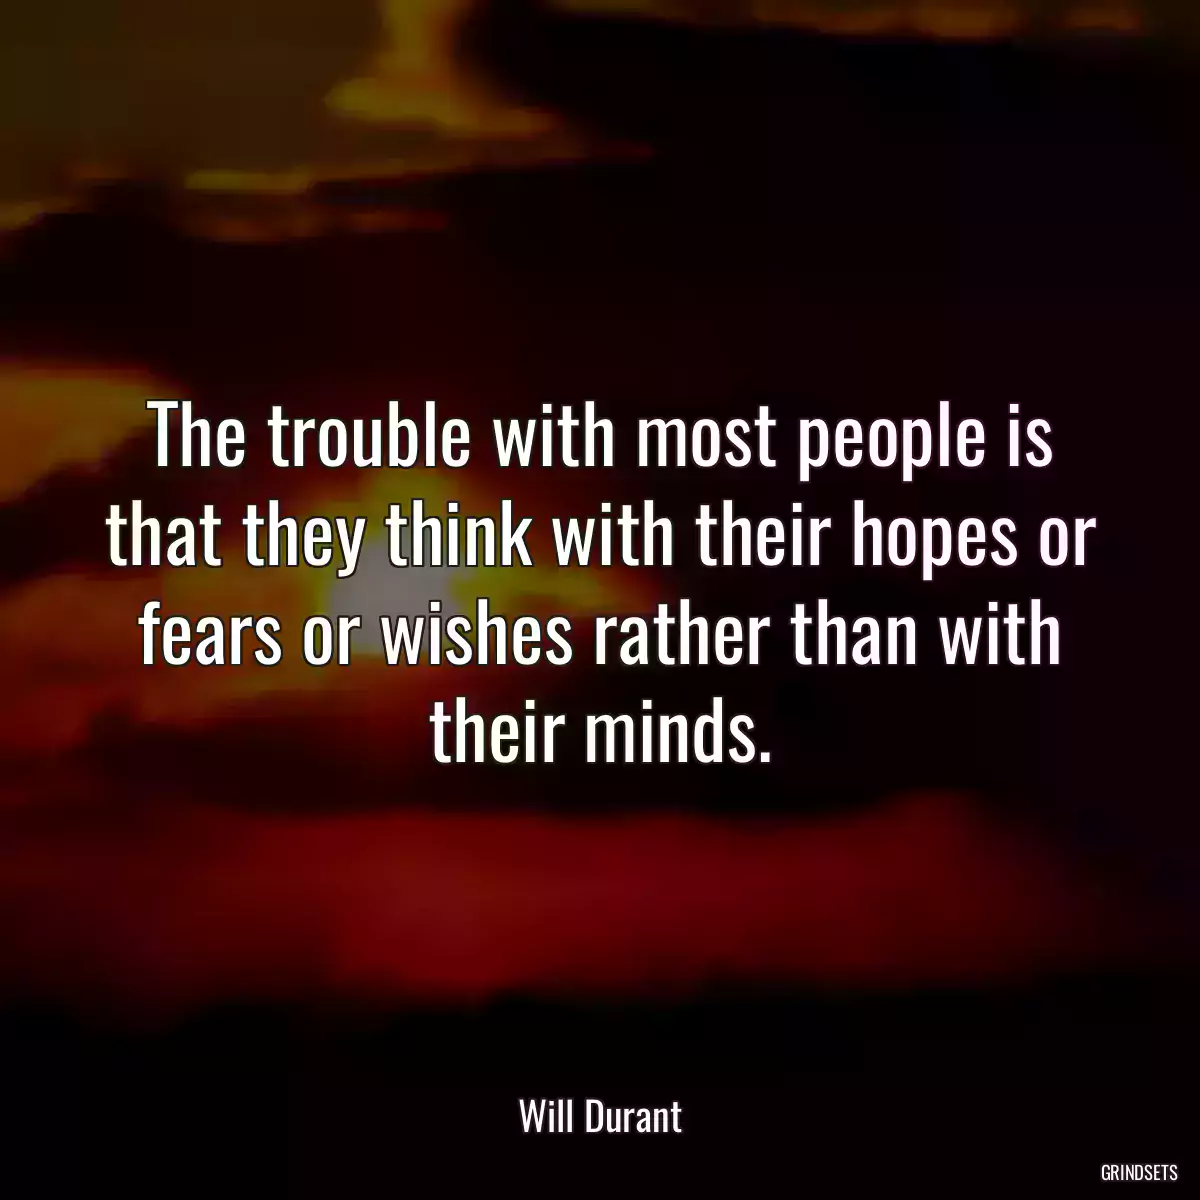 The trouble with most people is that they think with their hopes or fears or wishes rather than with their minds.